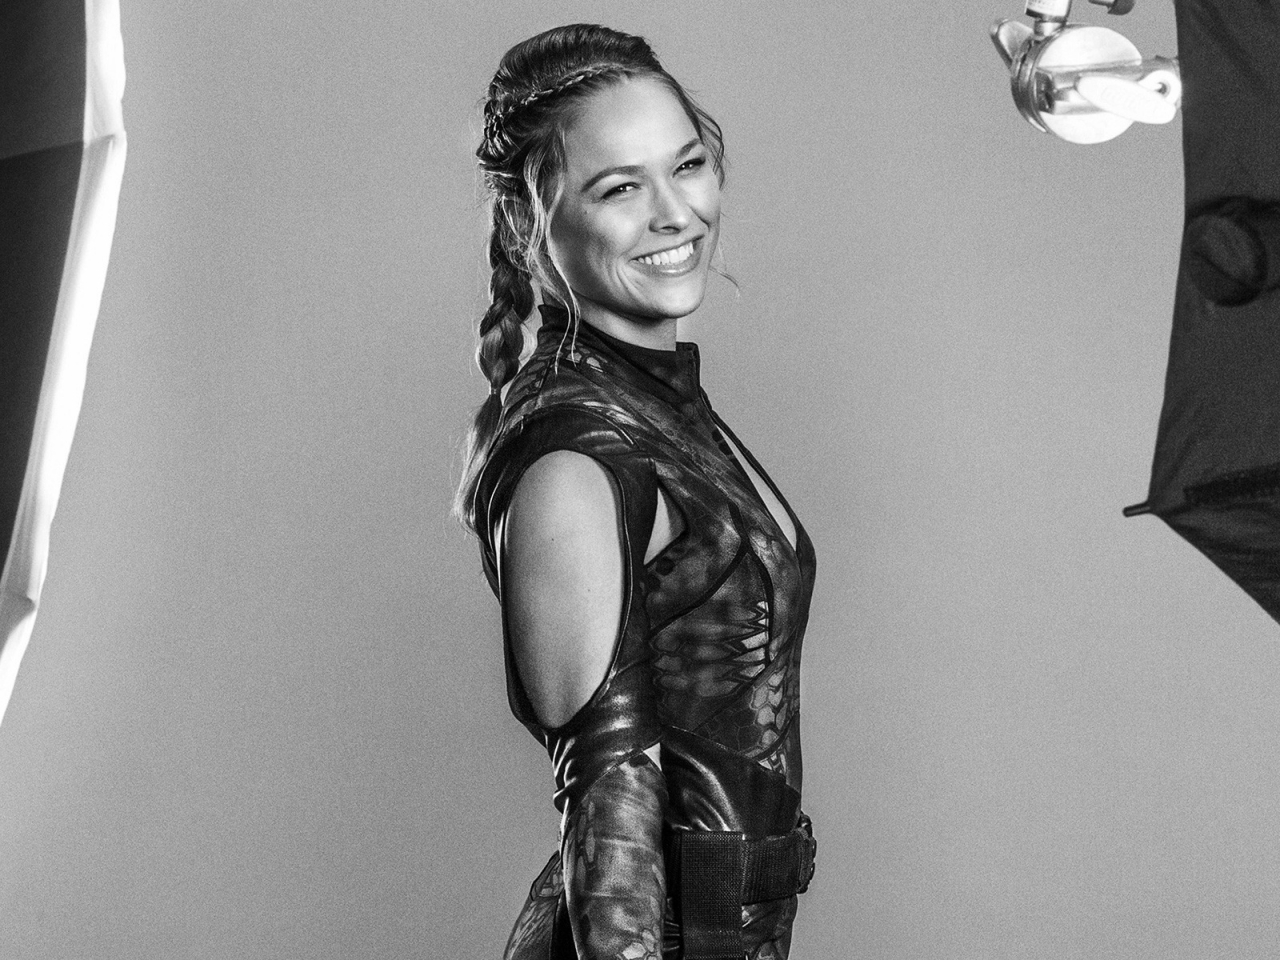 Ronda Rousey The Expendables 3 for 1280 x 960 resolution